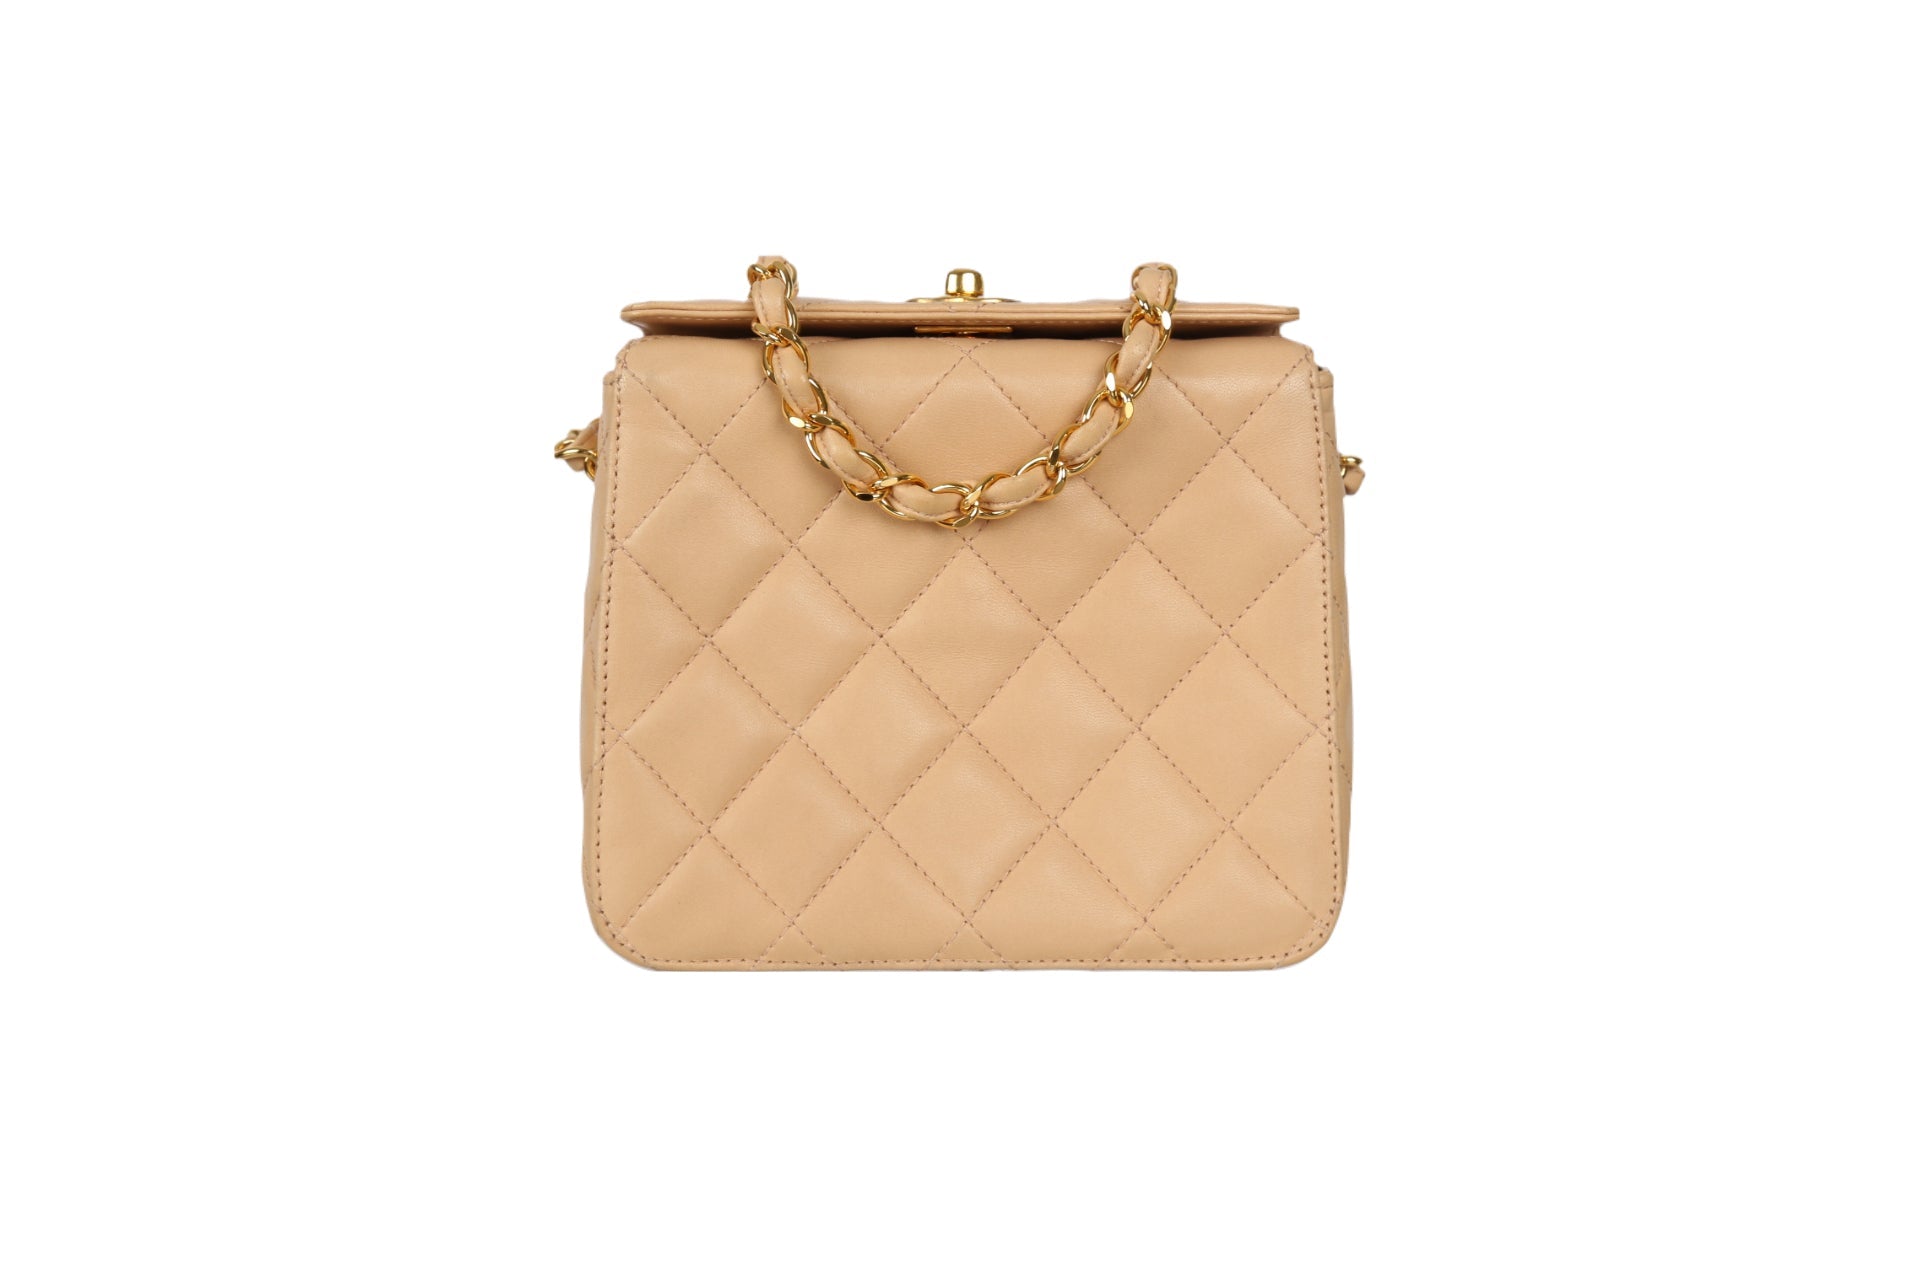 Chanel Beige Quilted Chain Mini Bag - Handbags